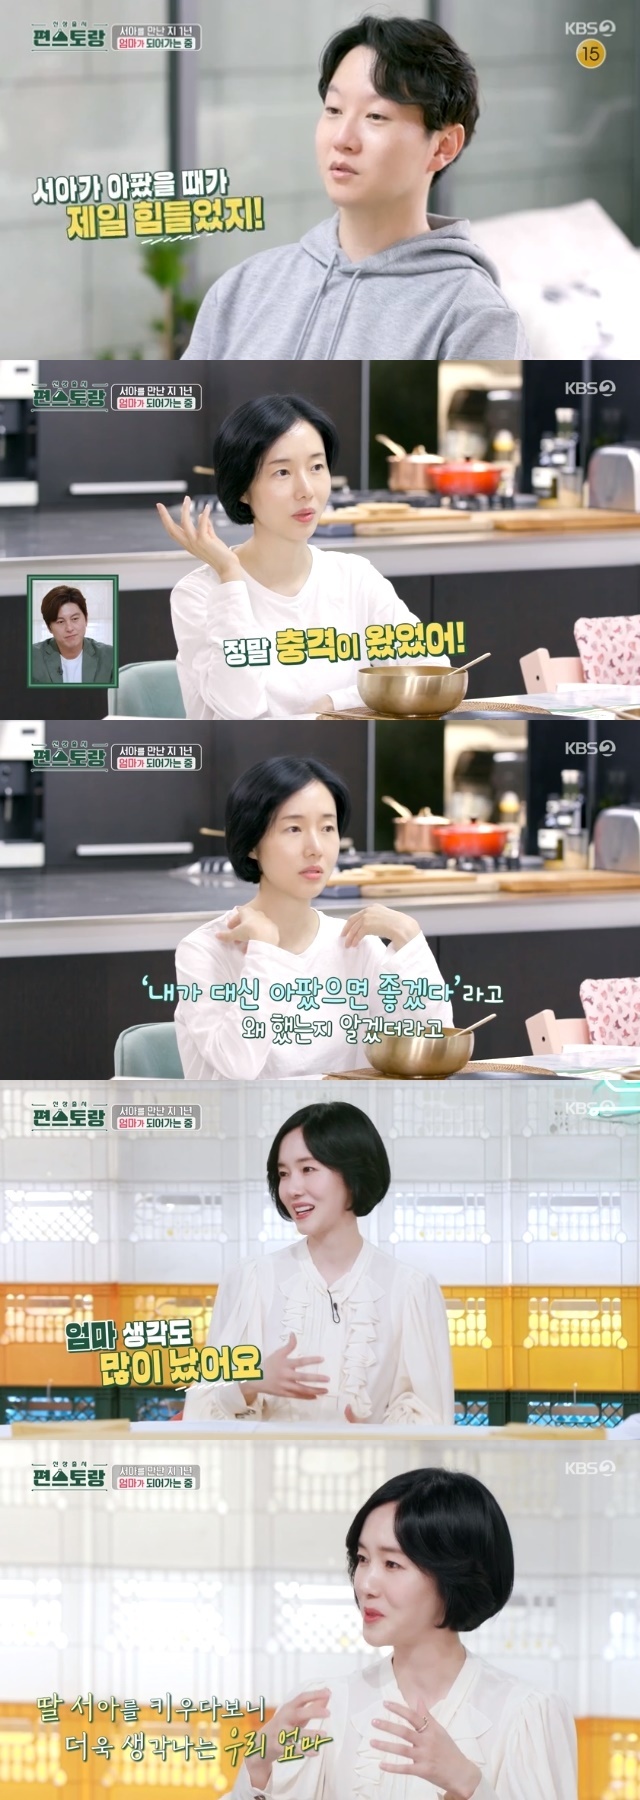 Lee Jung-hyun park yu-jung couple raised their daughter and talked about the confirmation of COVID-19 as the most difficult time.In the 188th KBS 2TV entertainment Stars Top Recipe at Fun-Staurant (hereinafter Stars Top Recipe at Fun-Staurant broadcasted on August 11, Lee Jung-hyun, Park yu-jung, who played Doljanchi of SeoA, looked back over the past year.When asked about the hardest moment of raising SeoA, Park yu-jung replied, When SeoA was sick. He added, During COVID-19, SeoA was not really sick, but then it hurt only once. That was really hard.Lee Jung-hyun sympathized with Park yu-jung and said, When I first saw my baby sick, I had a mental breakdown. Once upon a time, I knew why mothers said, I wish I was sick instead.I came out naturally, he said.Lee Jung-hyun said, I really thought about my mom.I looked at SeoA and I felt that my mother would look at me like this, he said, referring to his mother who died after his wedding.